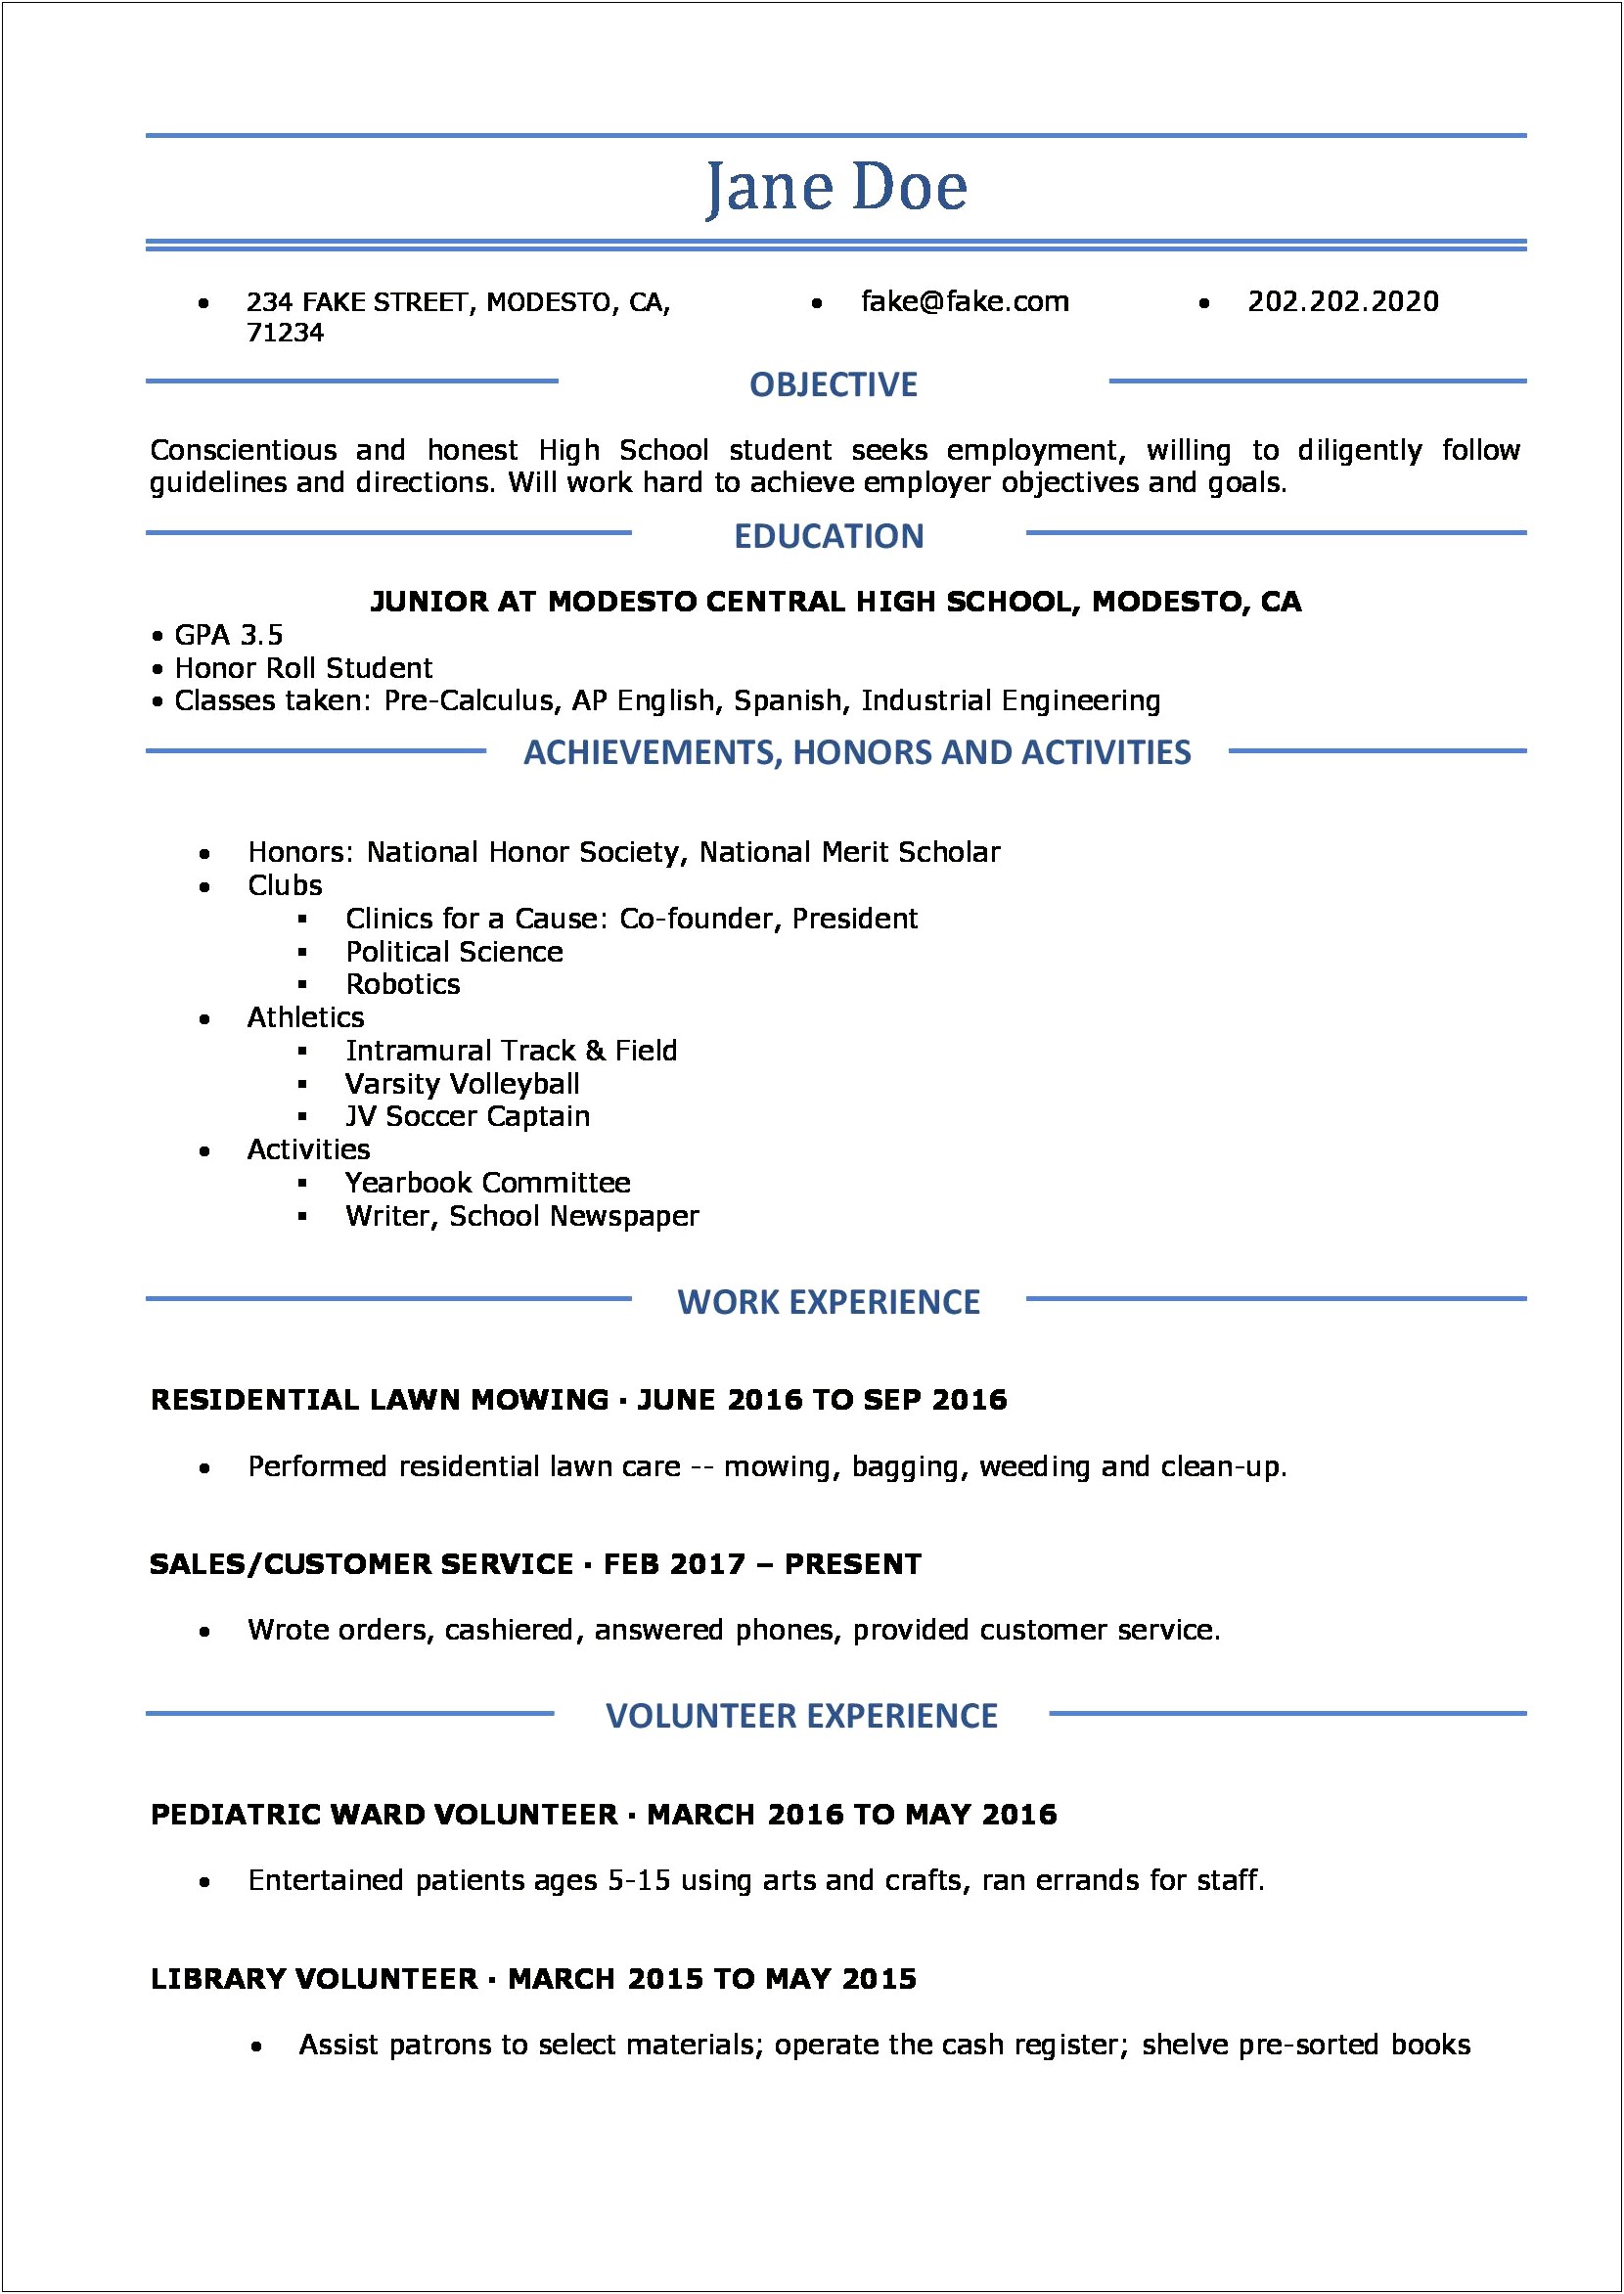 Resumes For Highschoolers Looking For Work